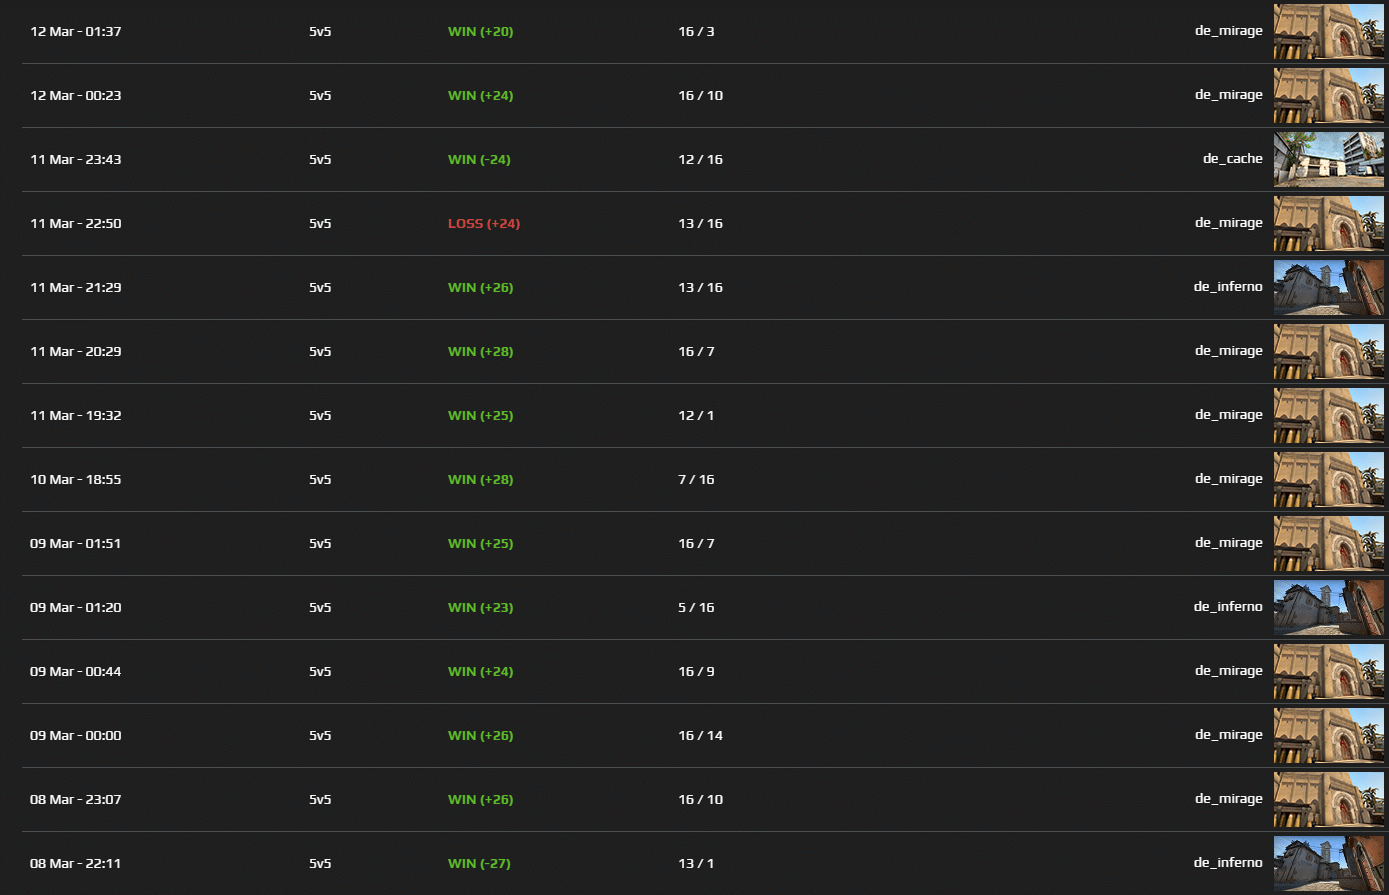 HOW I ABUSED FACEIT TO 2800 ELO BY PLAYING WITH LOW LEVELS #FIXFACEIT 